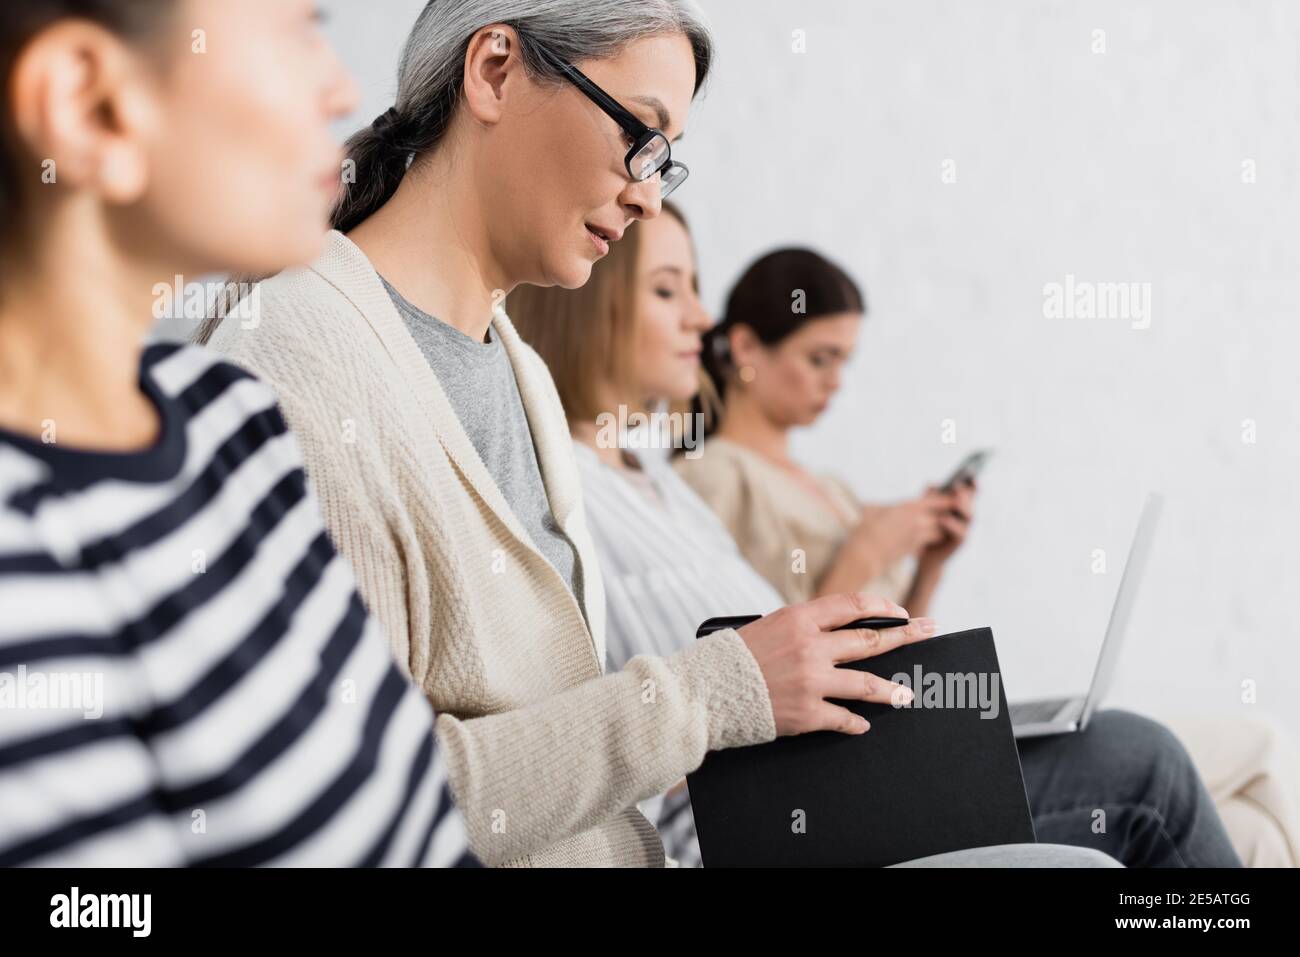 Asian businesswoman in glasses holding pen and notebook near coworkers during lecture Stock Photo